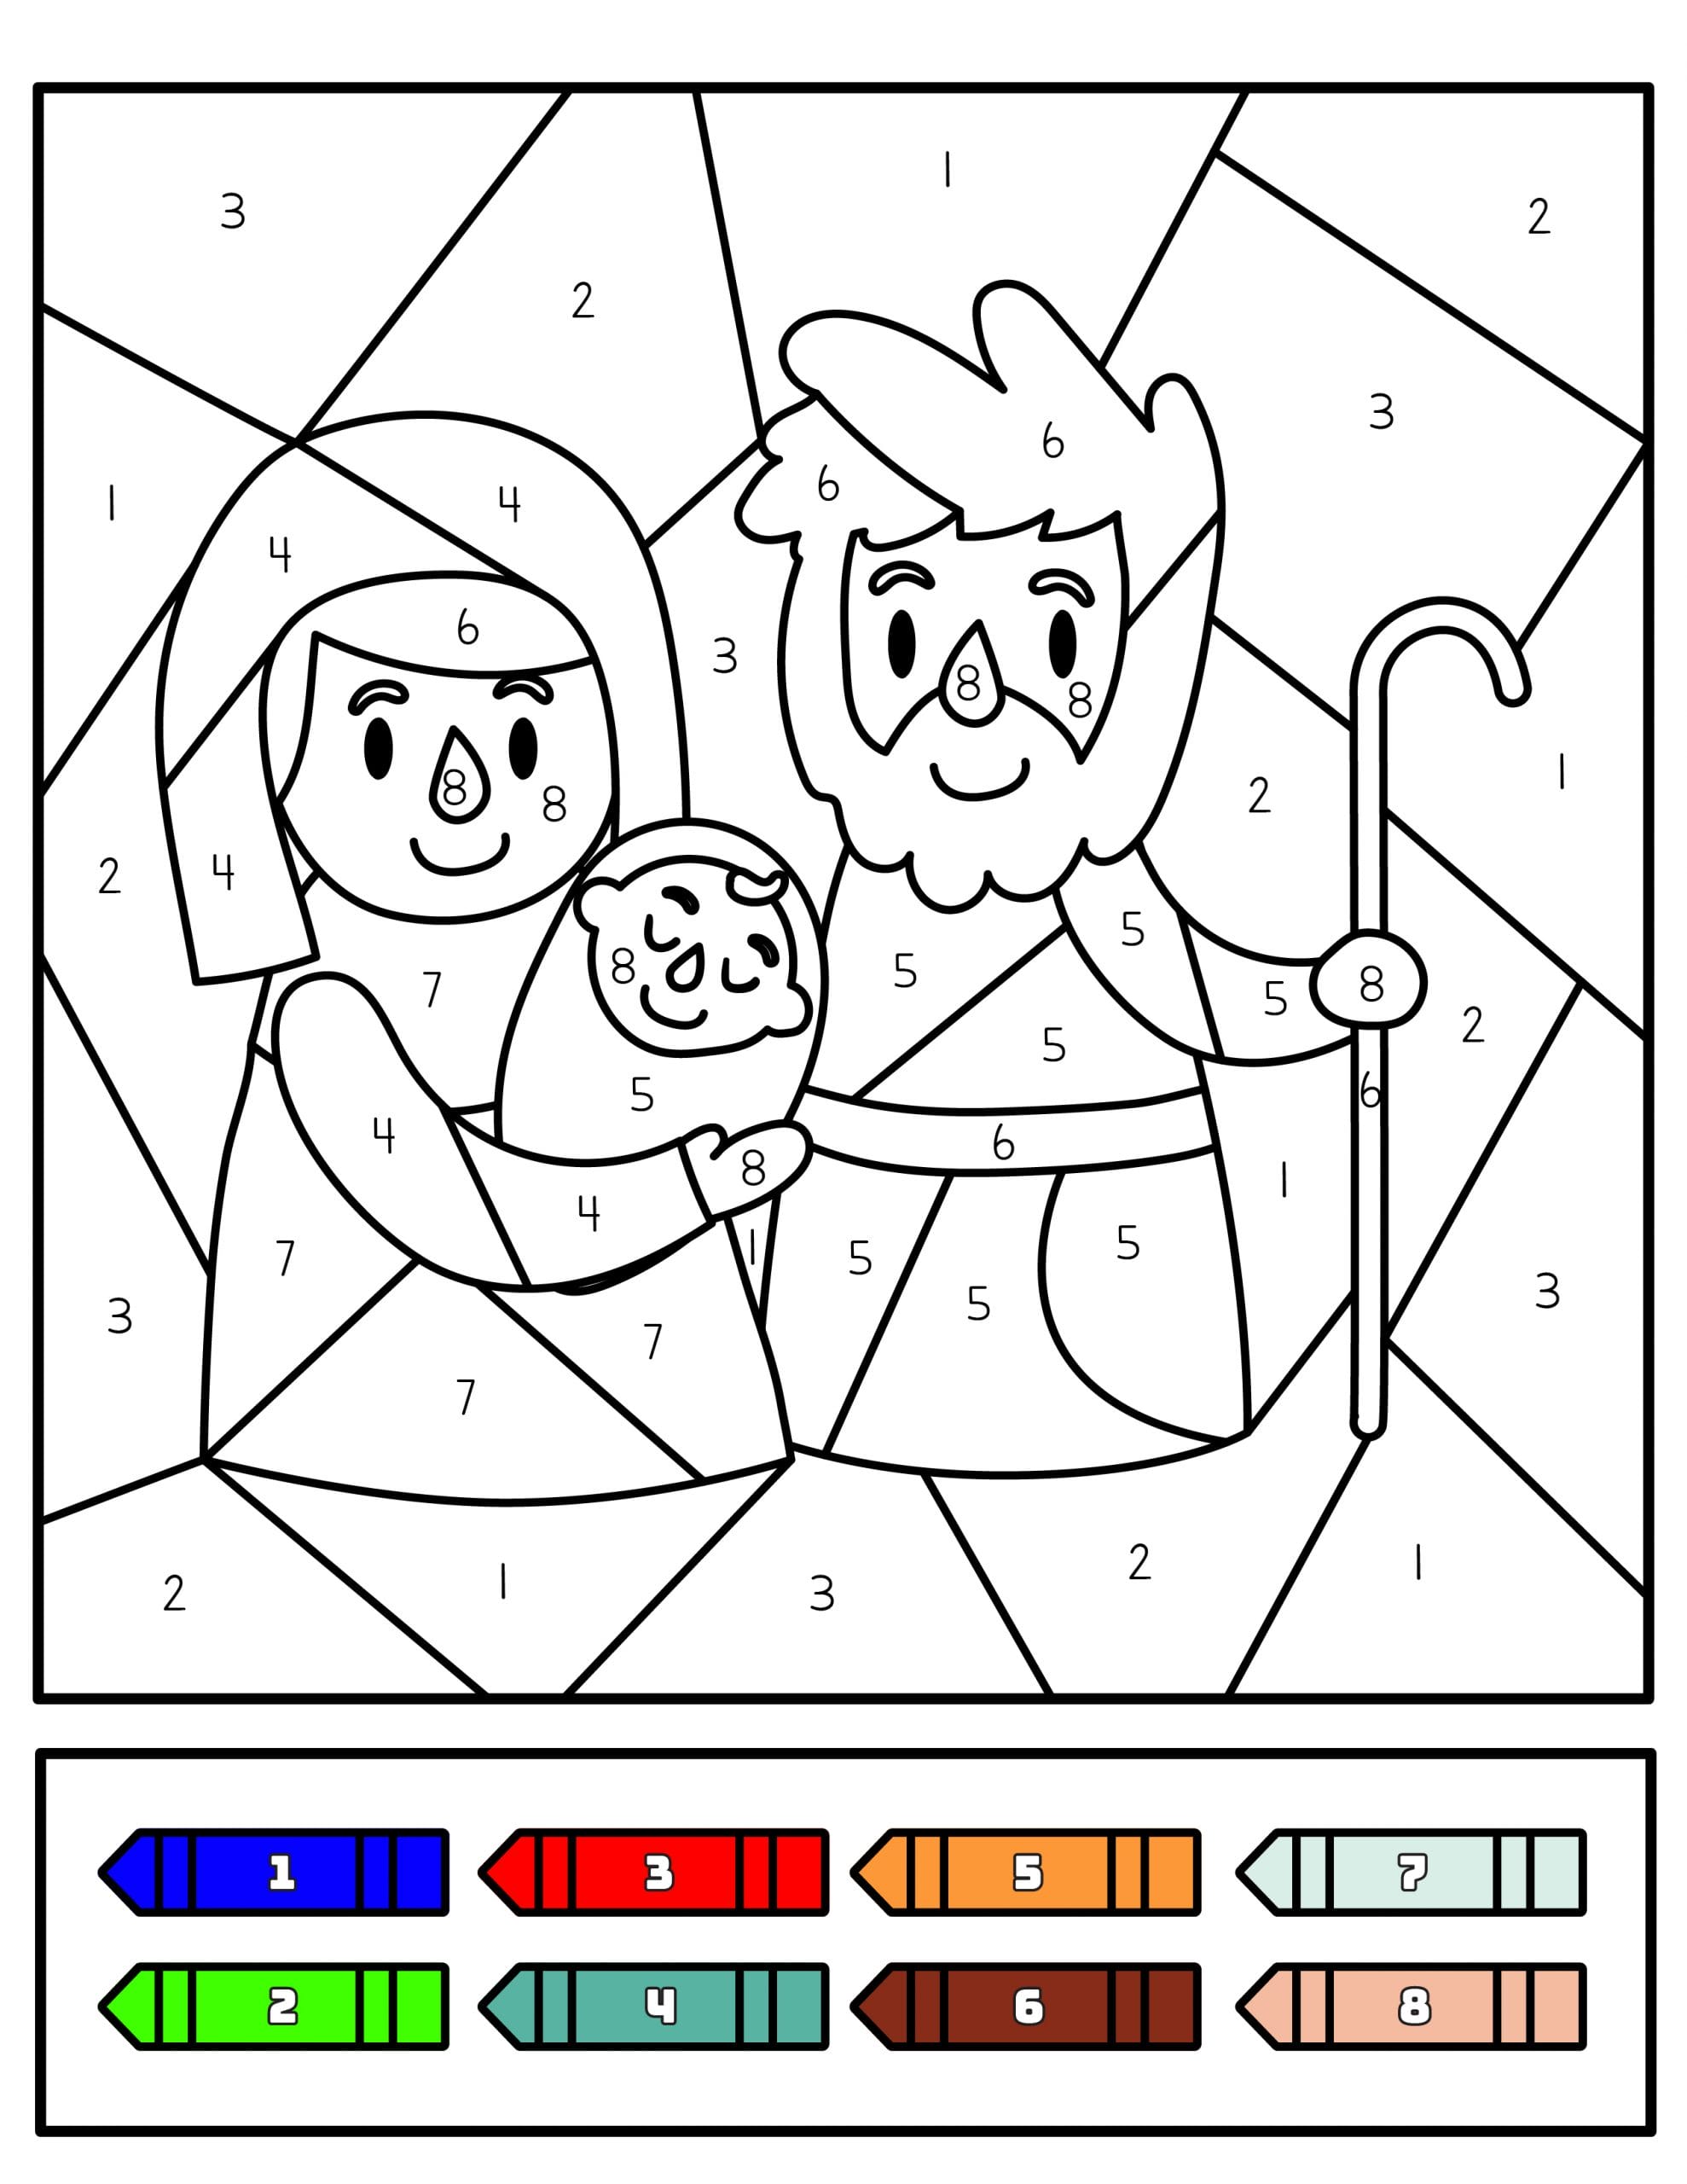 Printable Nativity Color by Number Activity Pack - About a Mom